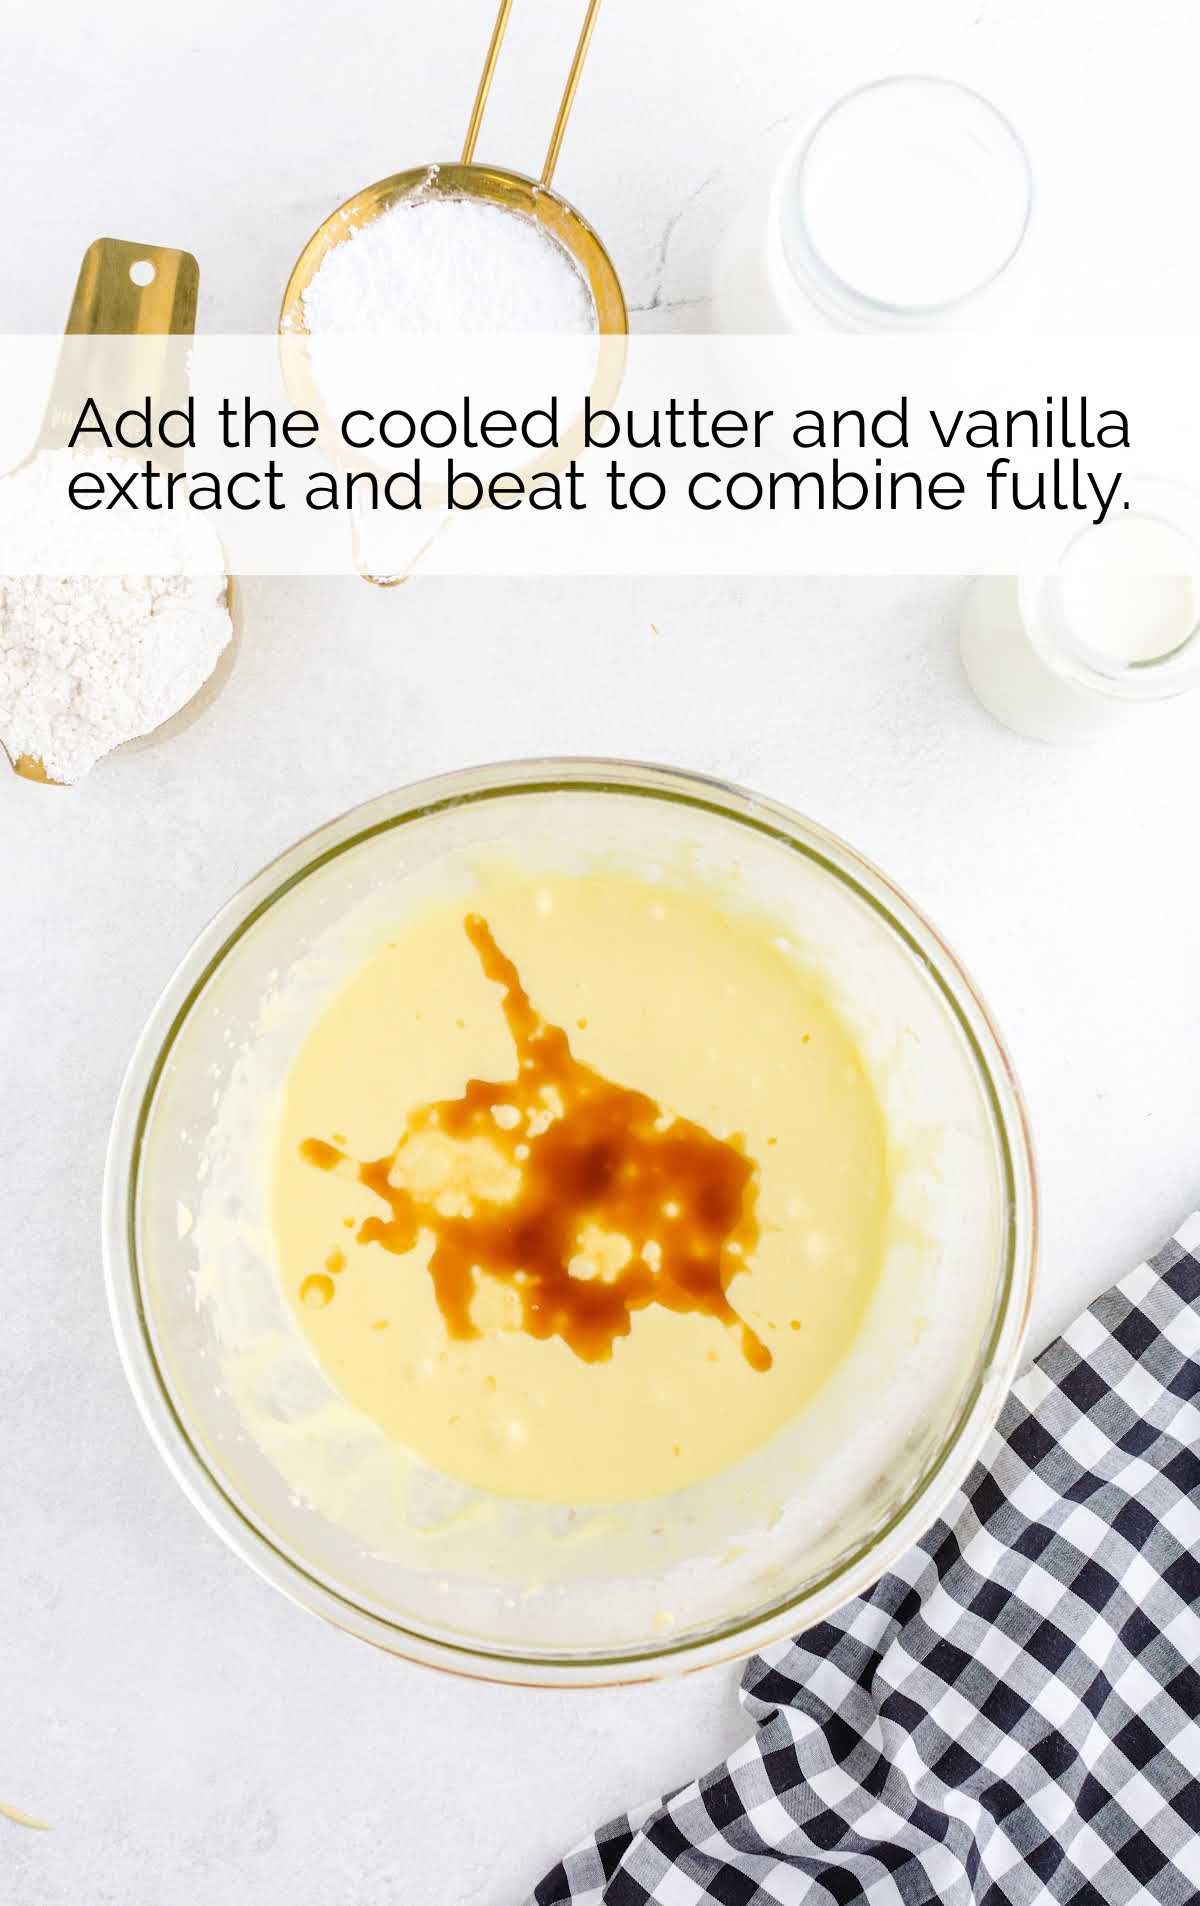 butter and vanilla combined with the egg yolk and sugar mixture in a bowl